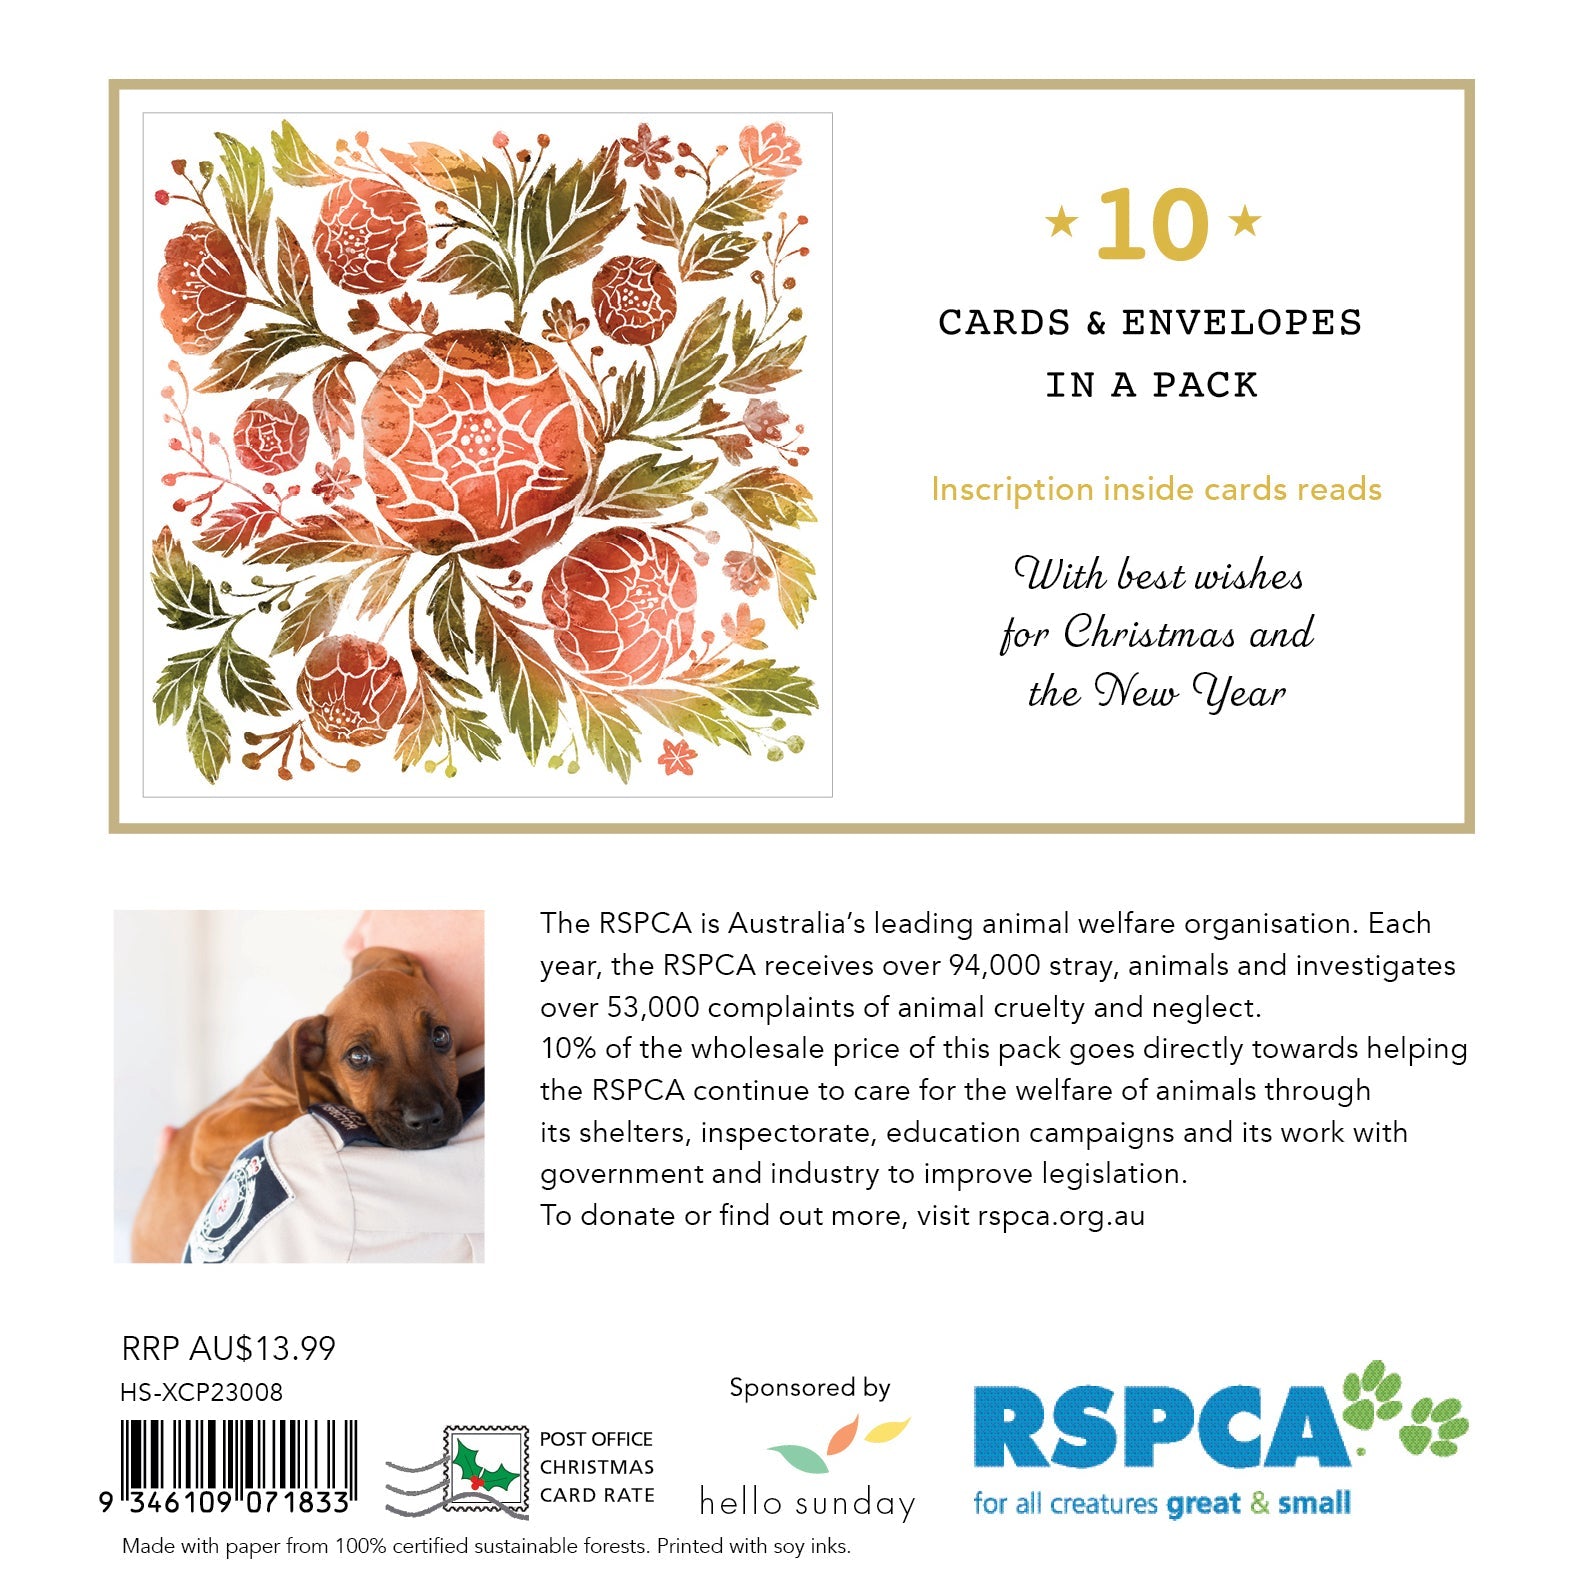 RSPCA Floral Christmas - 10 Charity Christmas Cards Pack